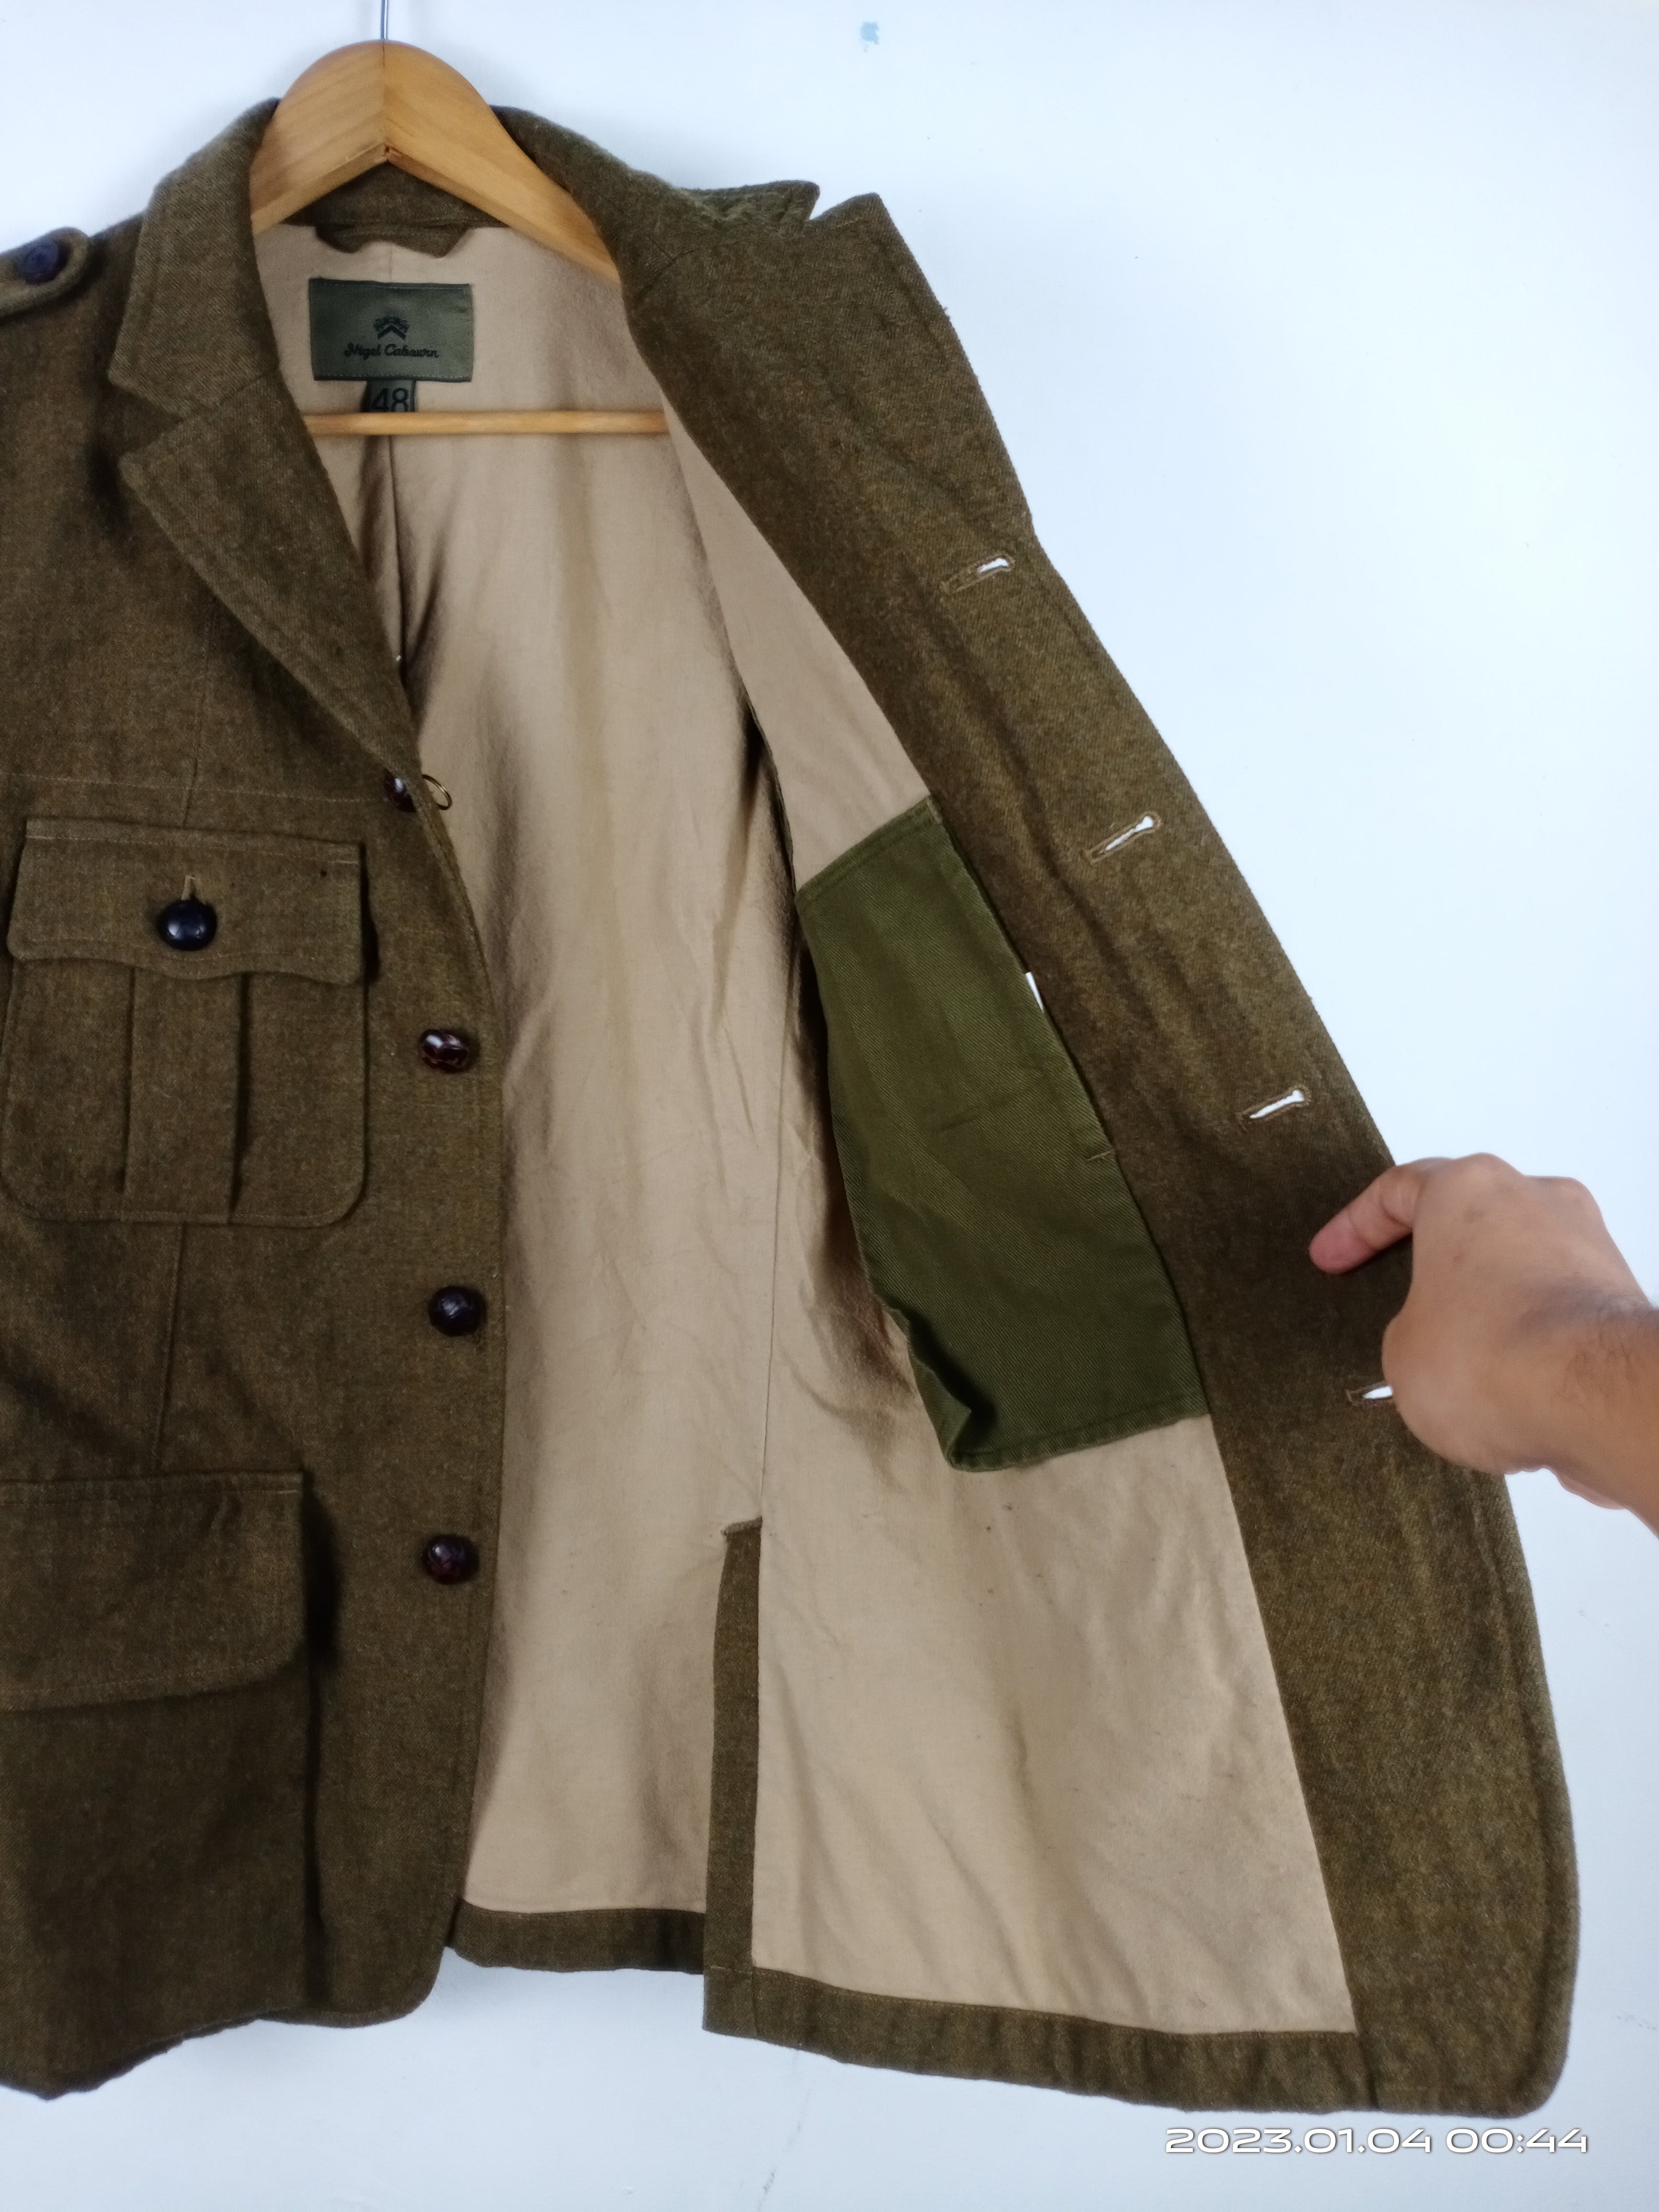 💥RARE💥Vintage Nigel Cabourn Wool Military Style Jacket - 15